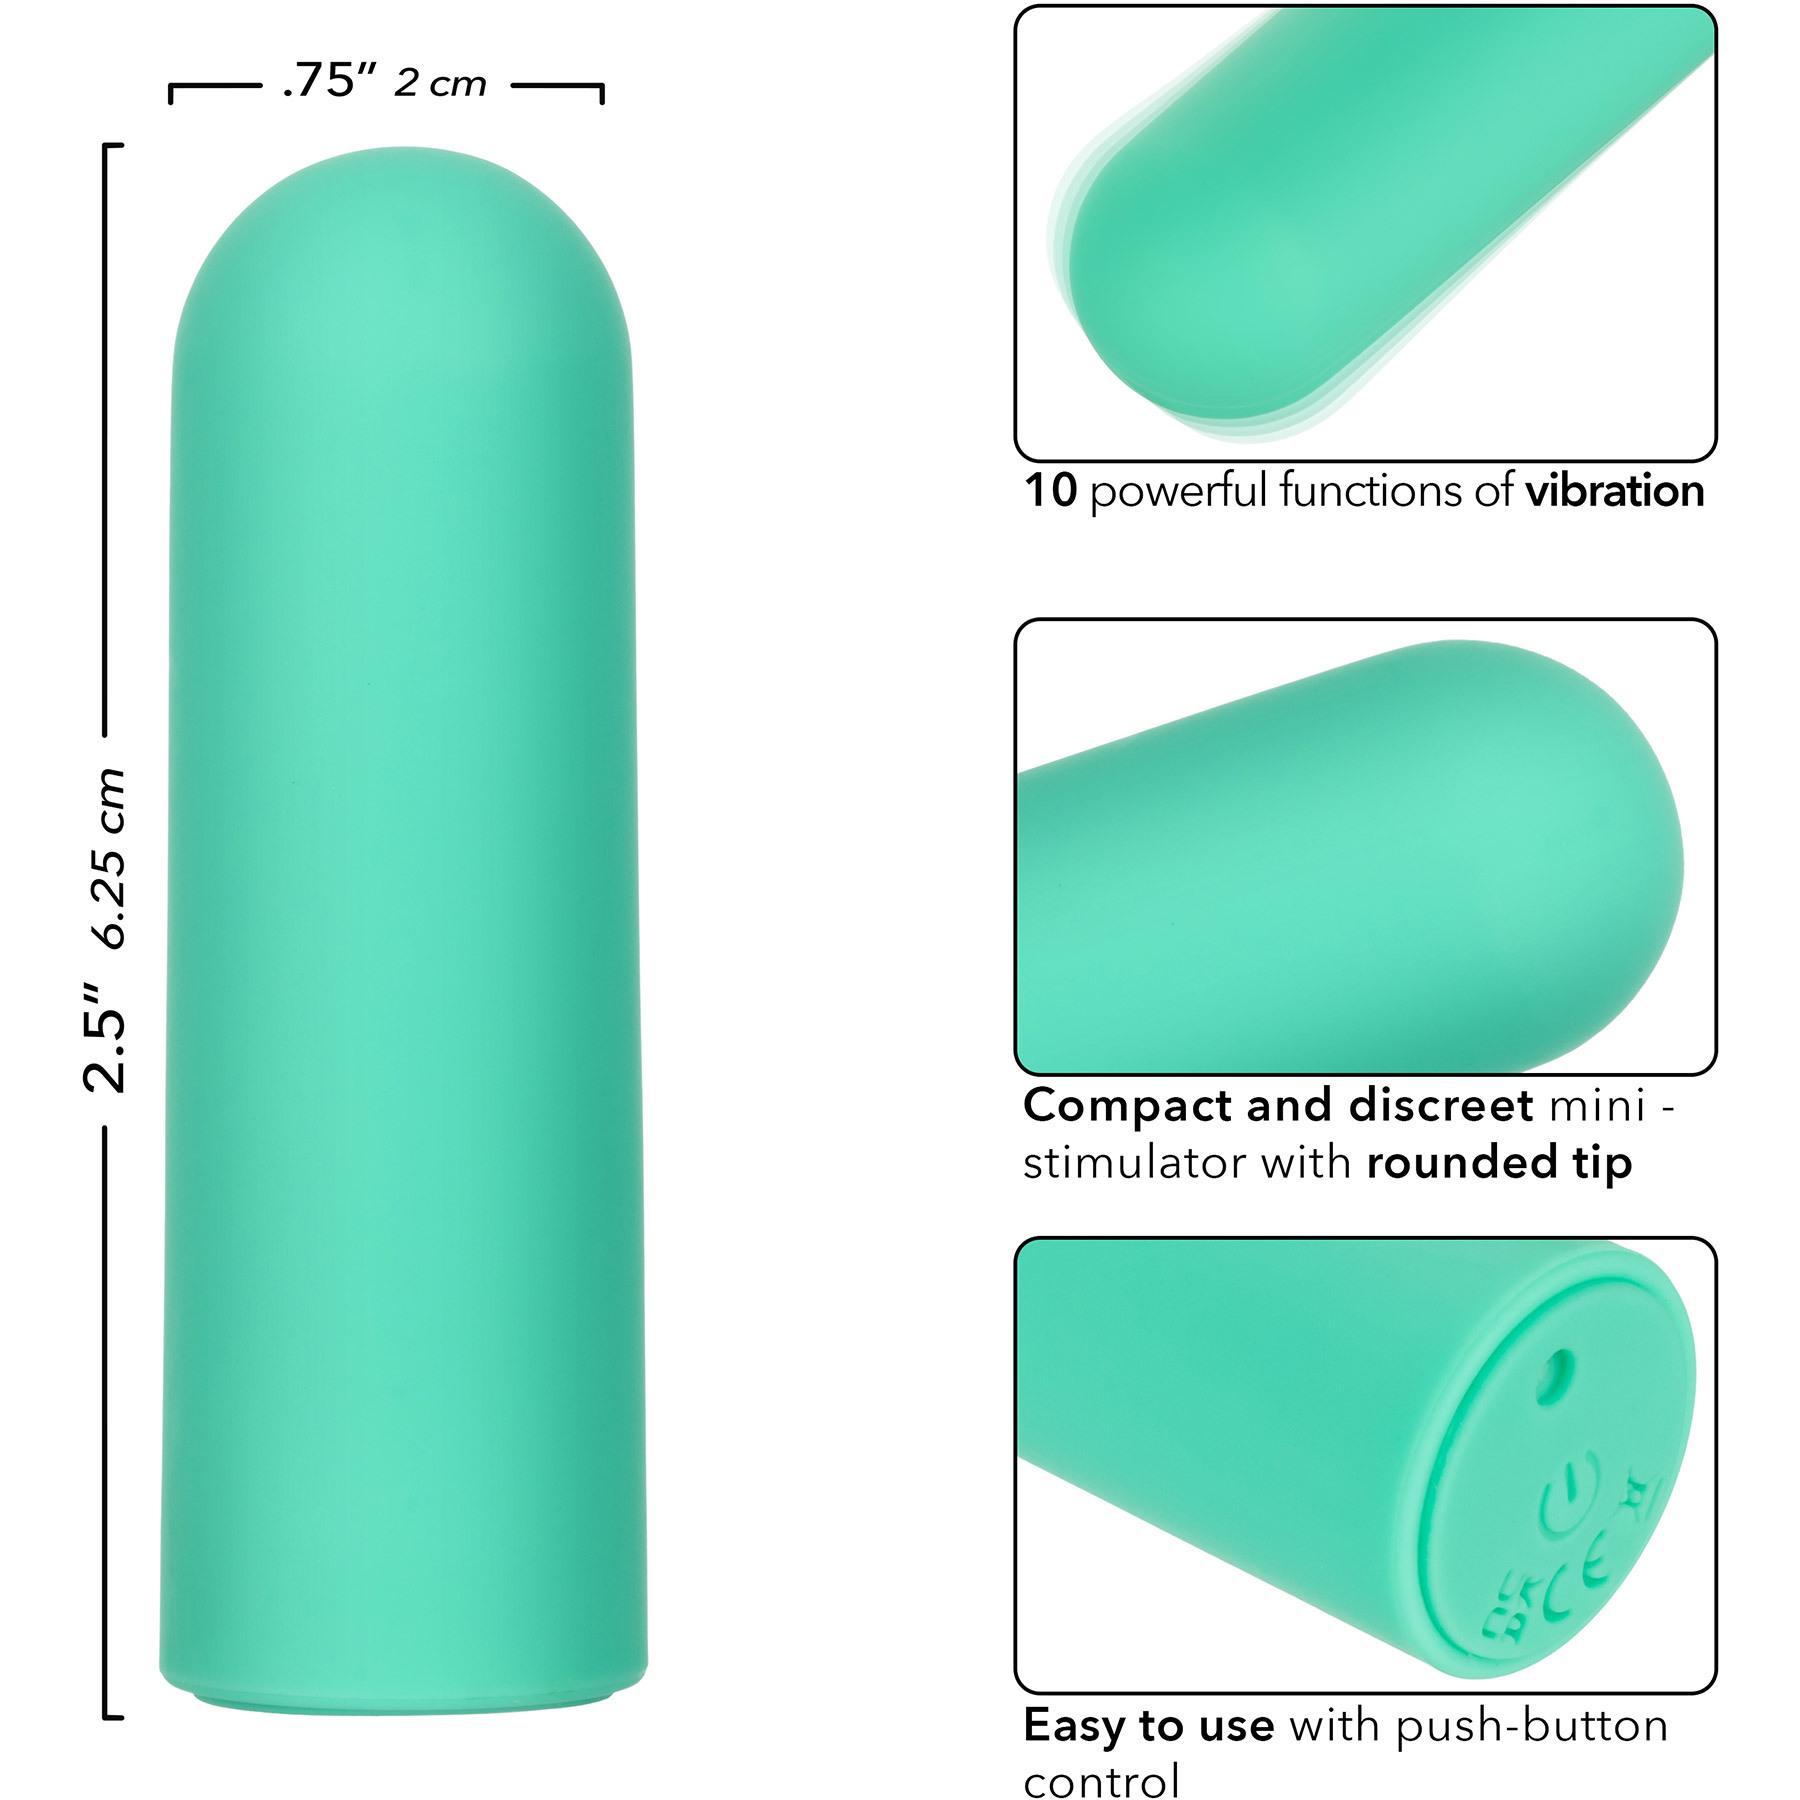 Turbo Buzz Rounded Mini Bullet Rechargeable Waterproof Vibrator - Measurements